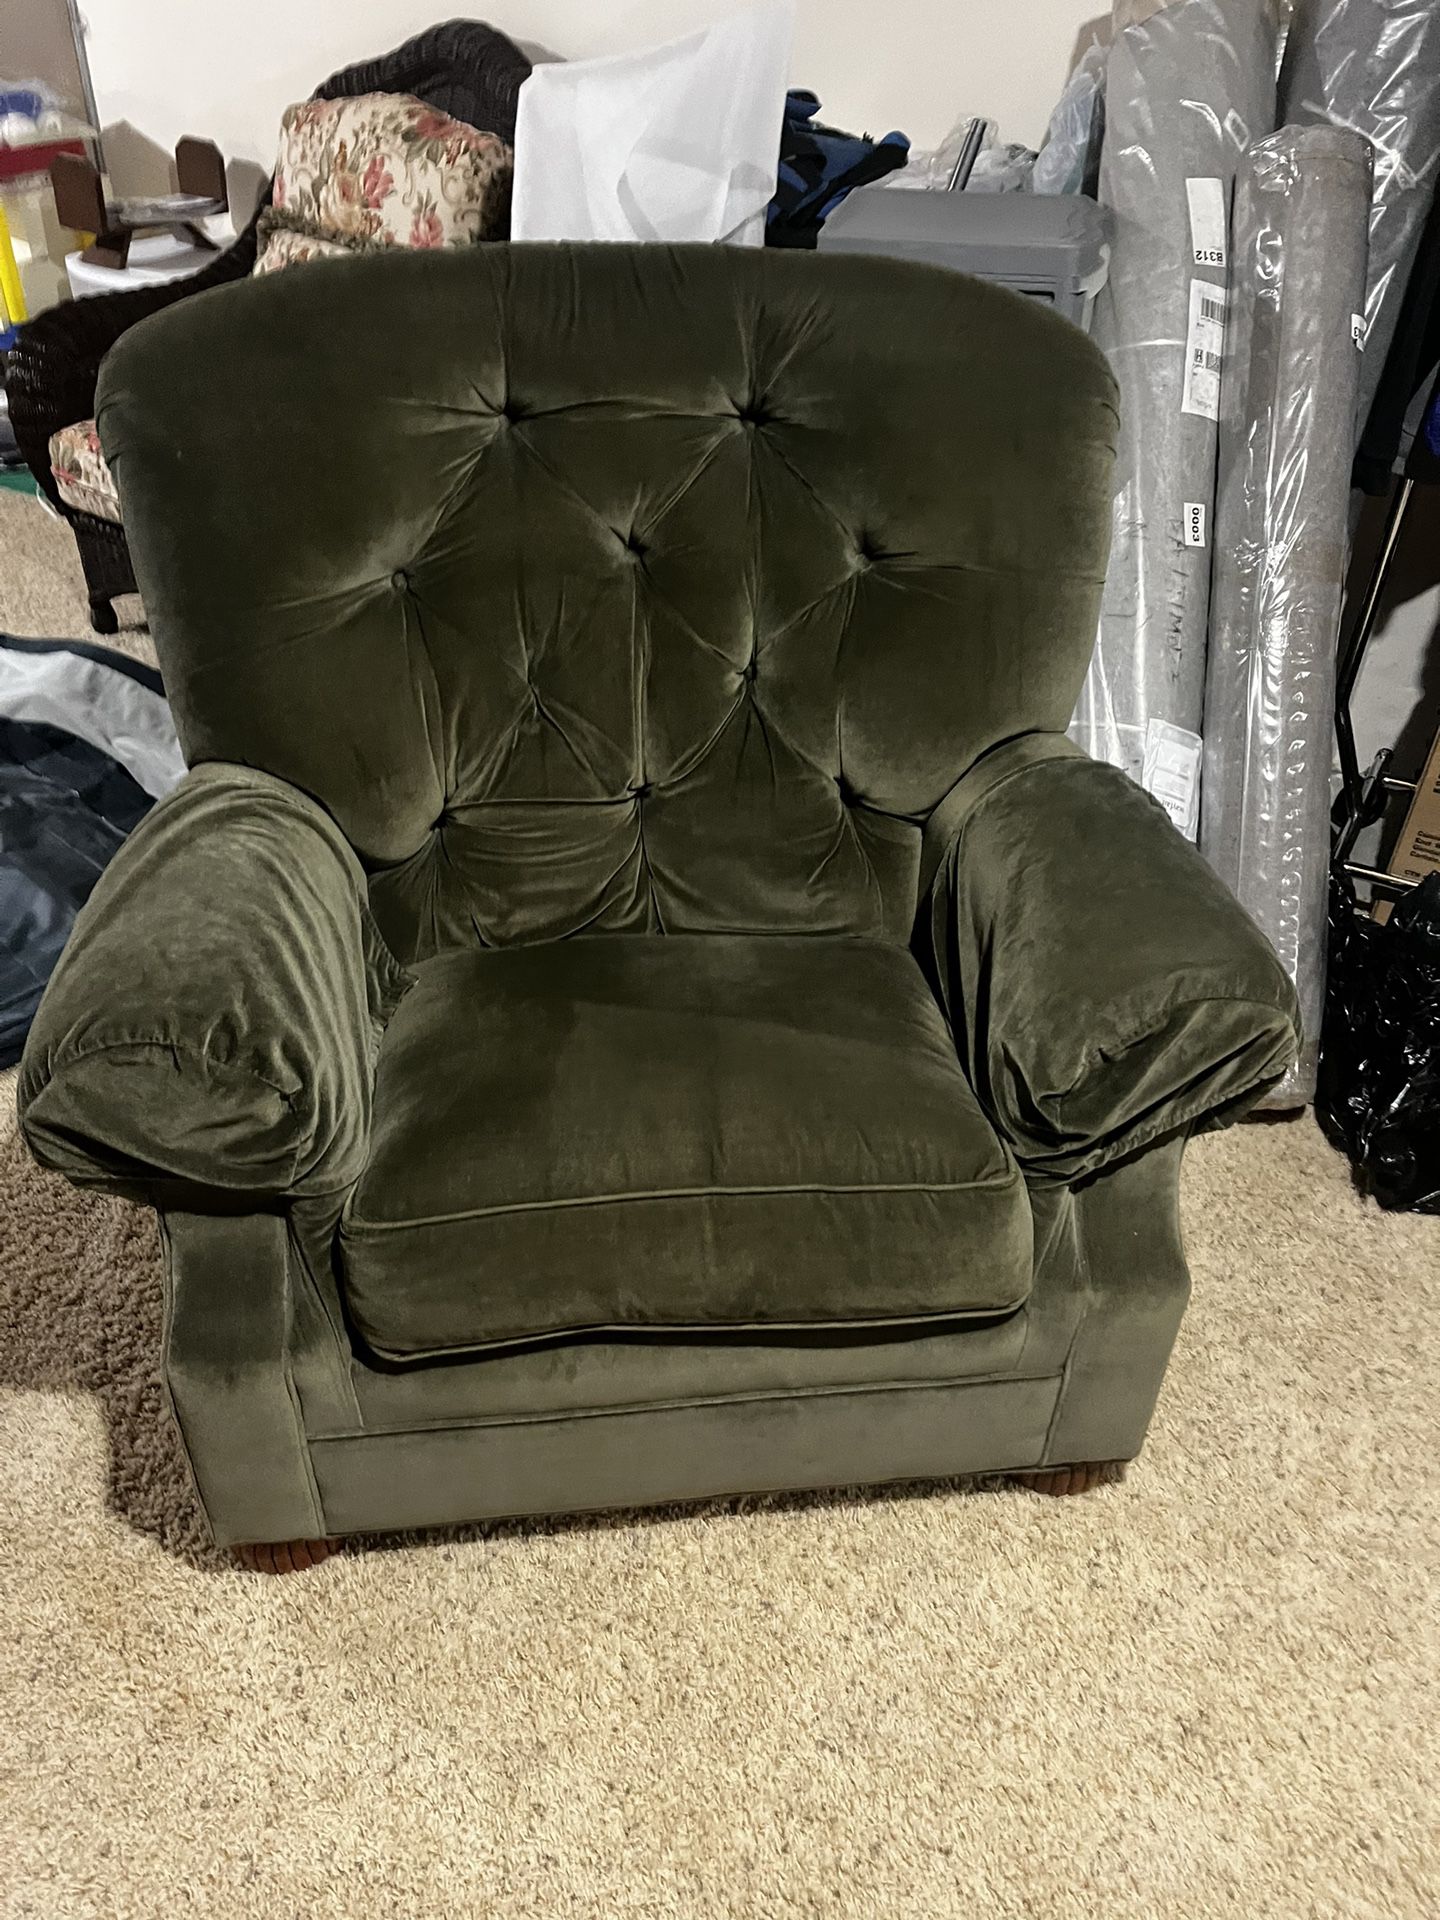 Lg Green Chair with Green Ottoman.